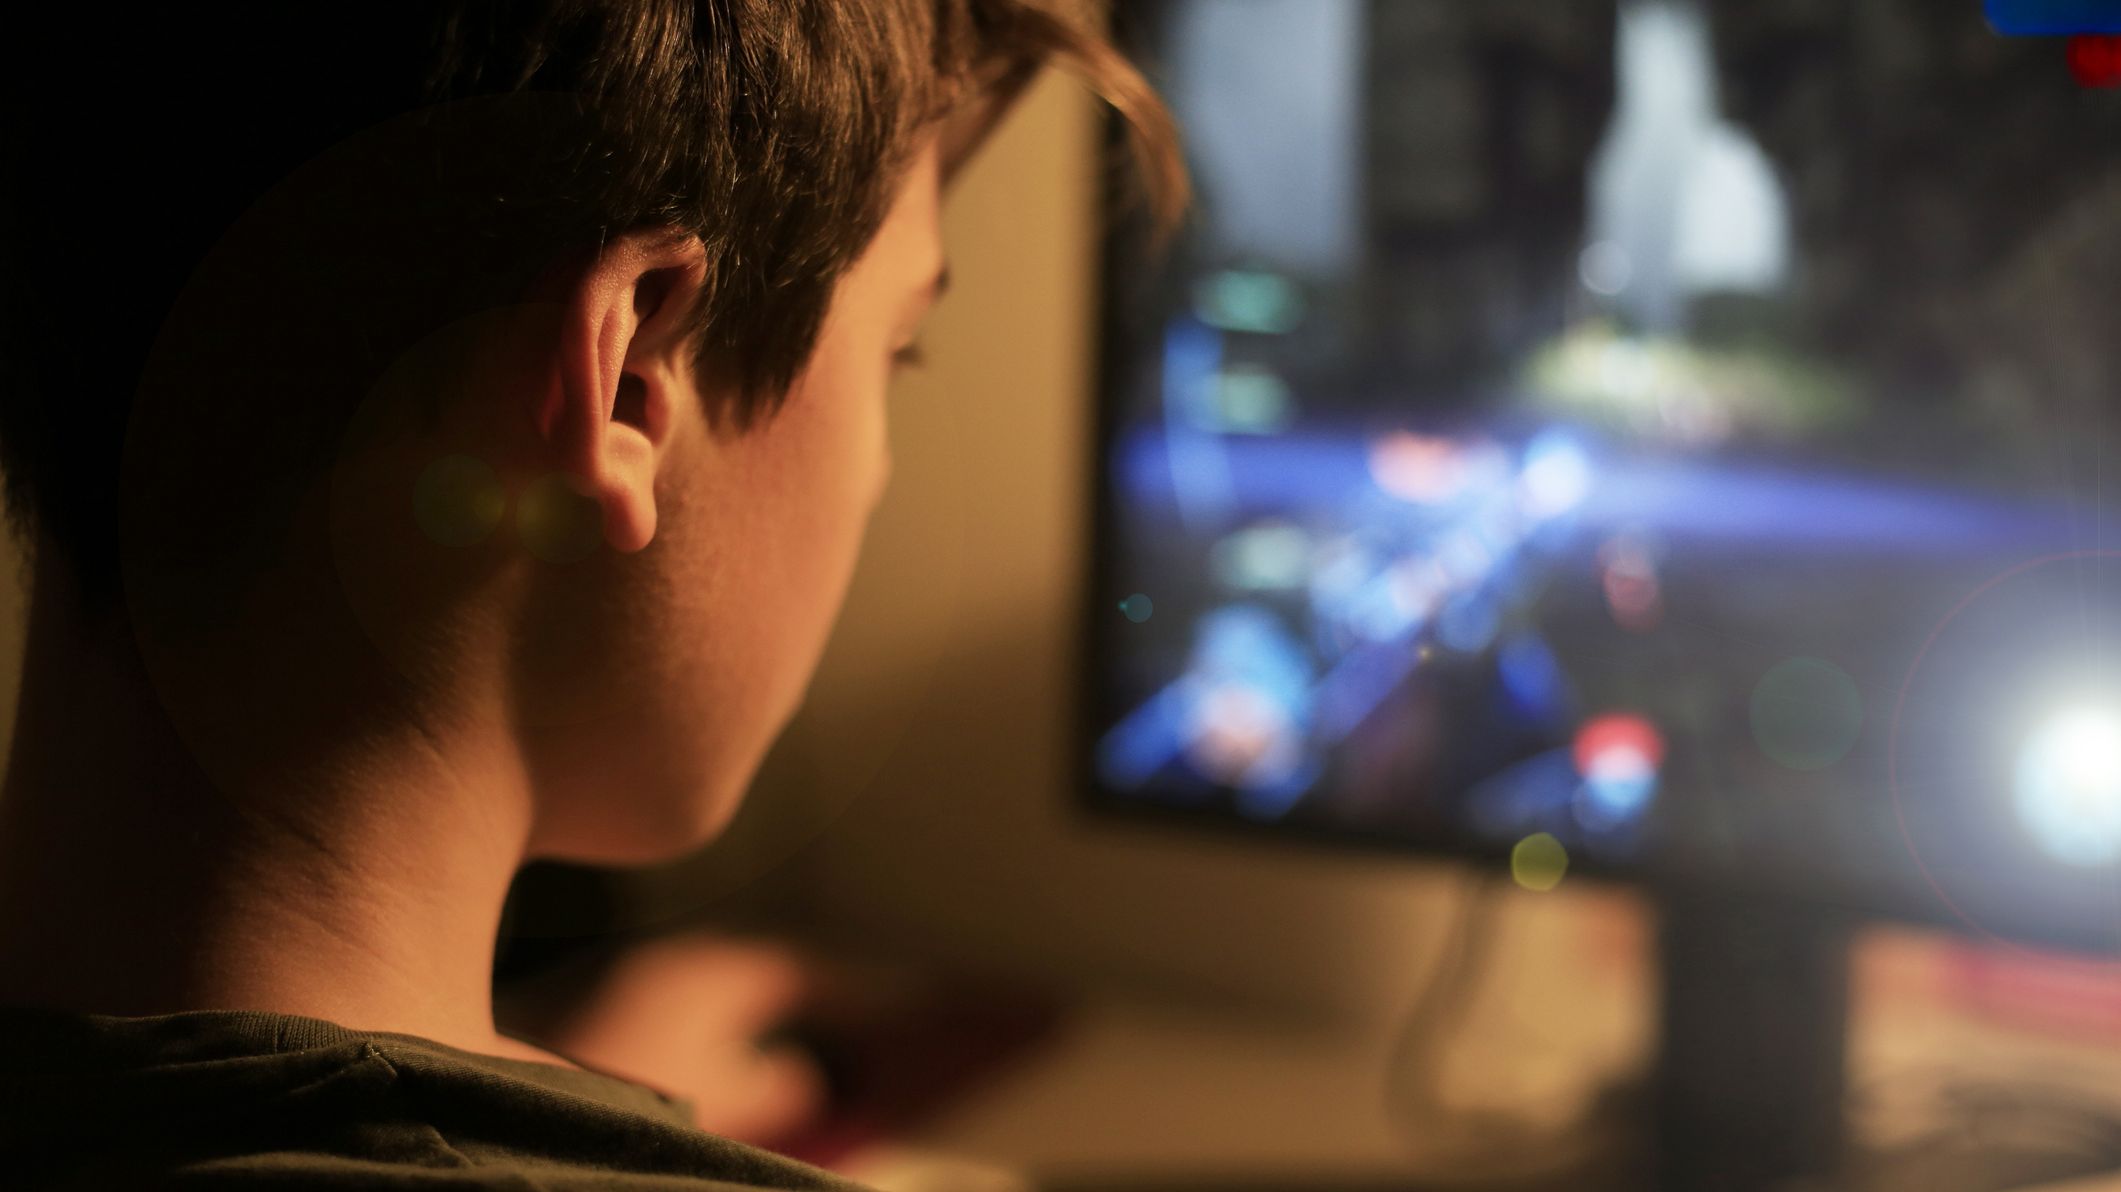 Excessive Gaming Might Soon Be Recognized As An Official Disorder